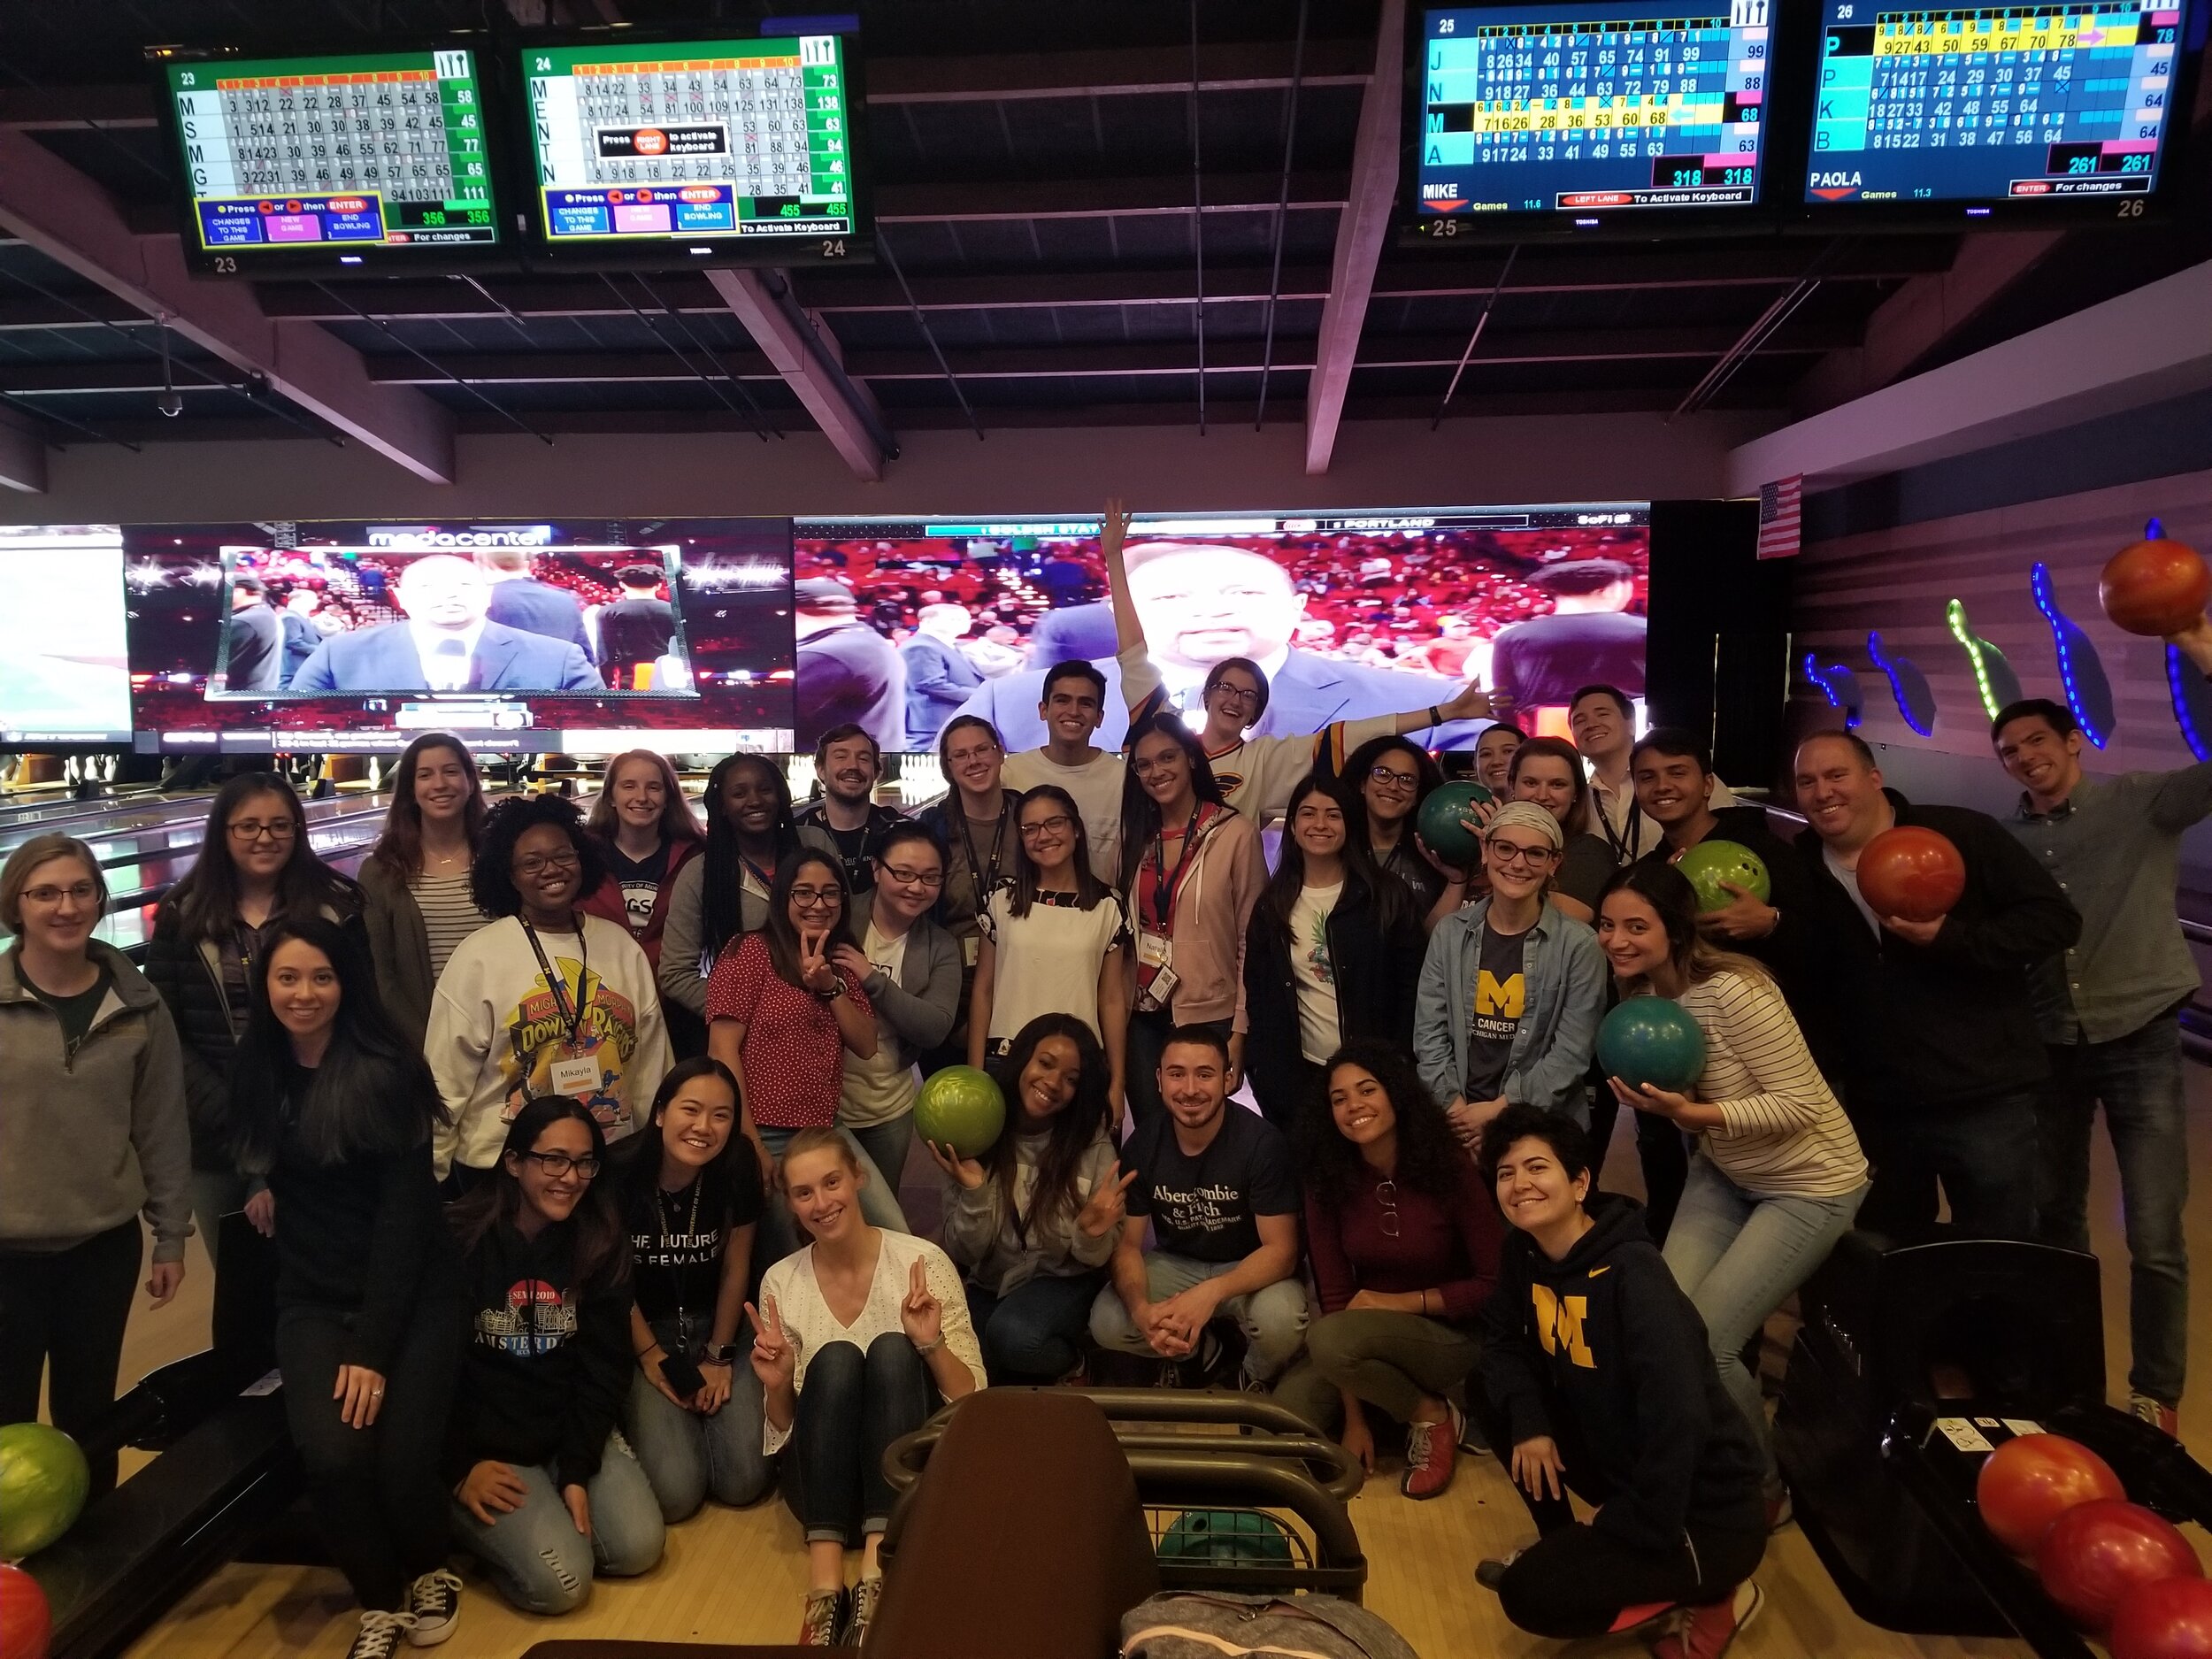  Students and instructors enjoy a fun bowling night 